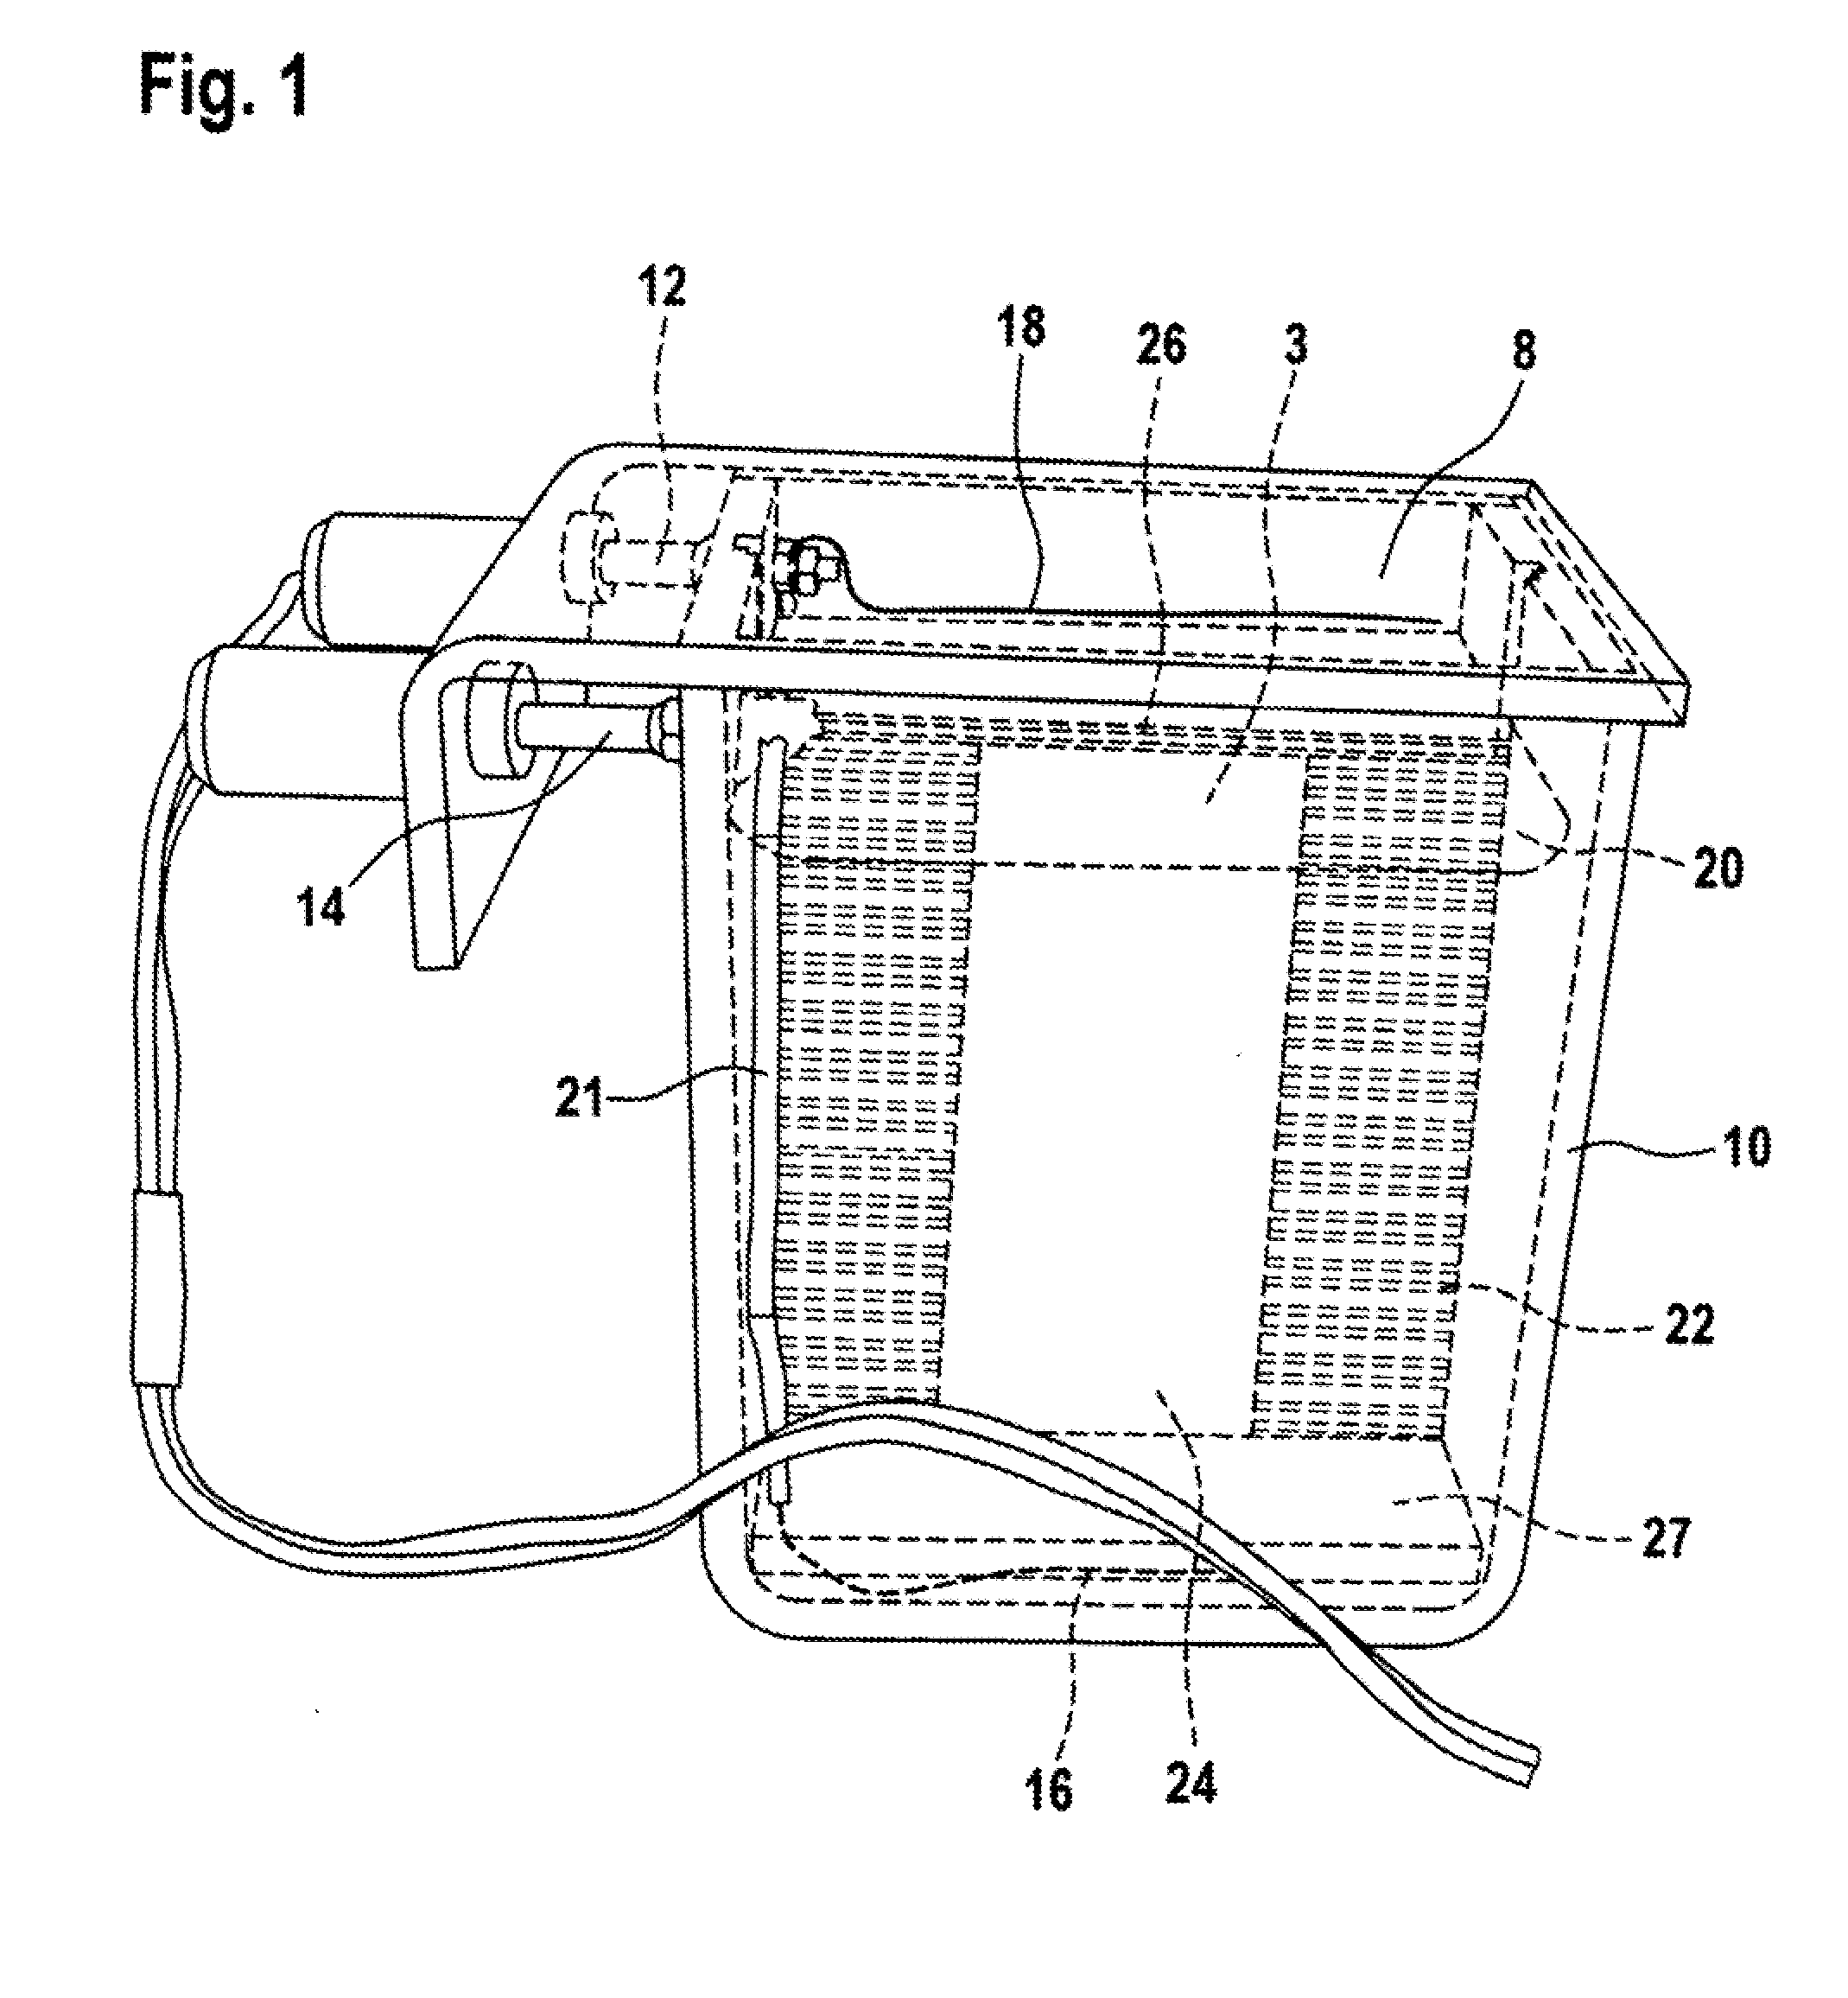 Apparatus, method, and gel system for analytical and preparative electrophoresis